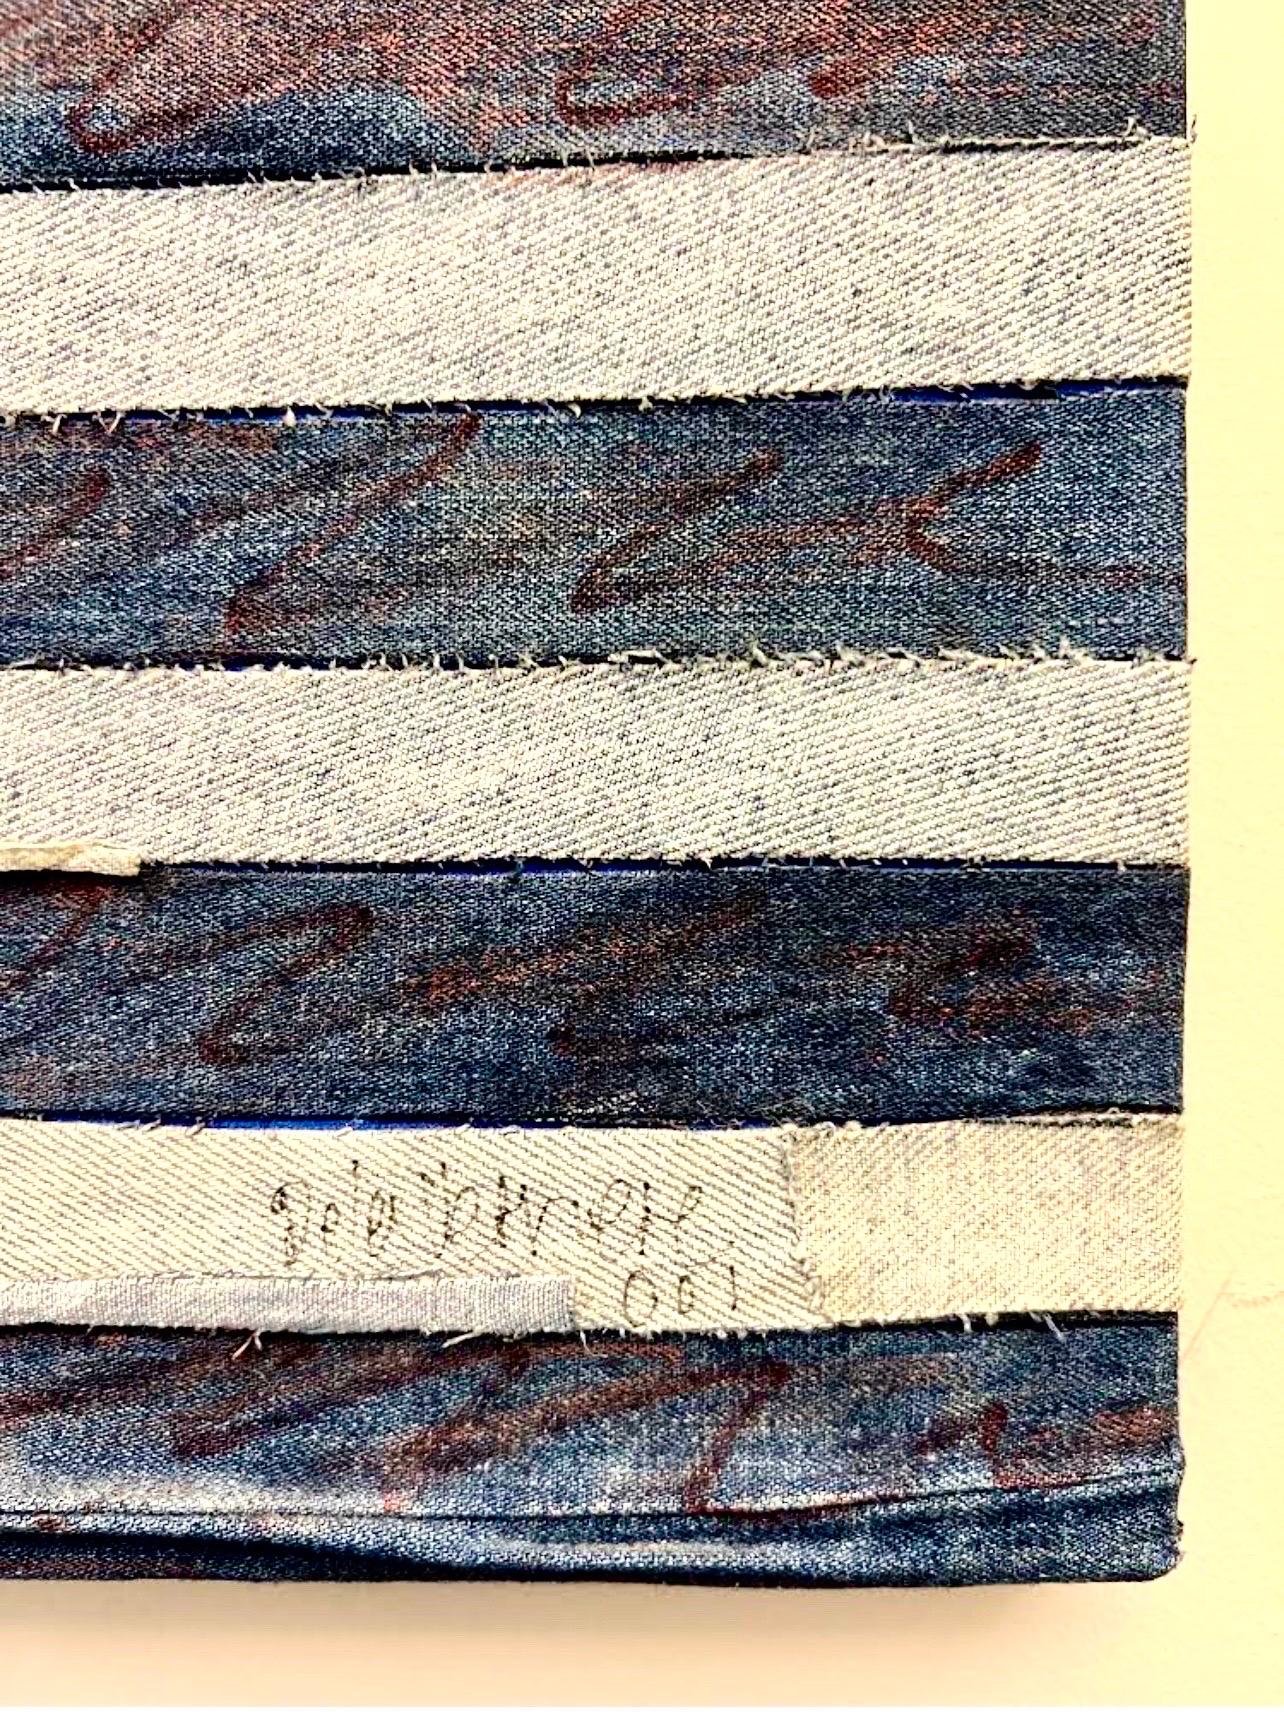 Pop Art American Flag in Handsewn Patchwork Denim. 
I had another with a label from OK Harris Gallery verso. This one does not have that label or the label Label from Pratt verso (Pratt MFA '75) 
Not positive of the year
Hand signed
Genre: